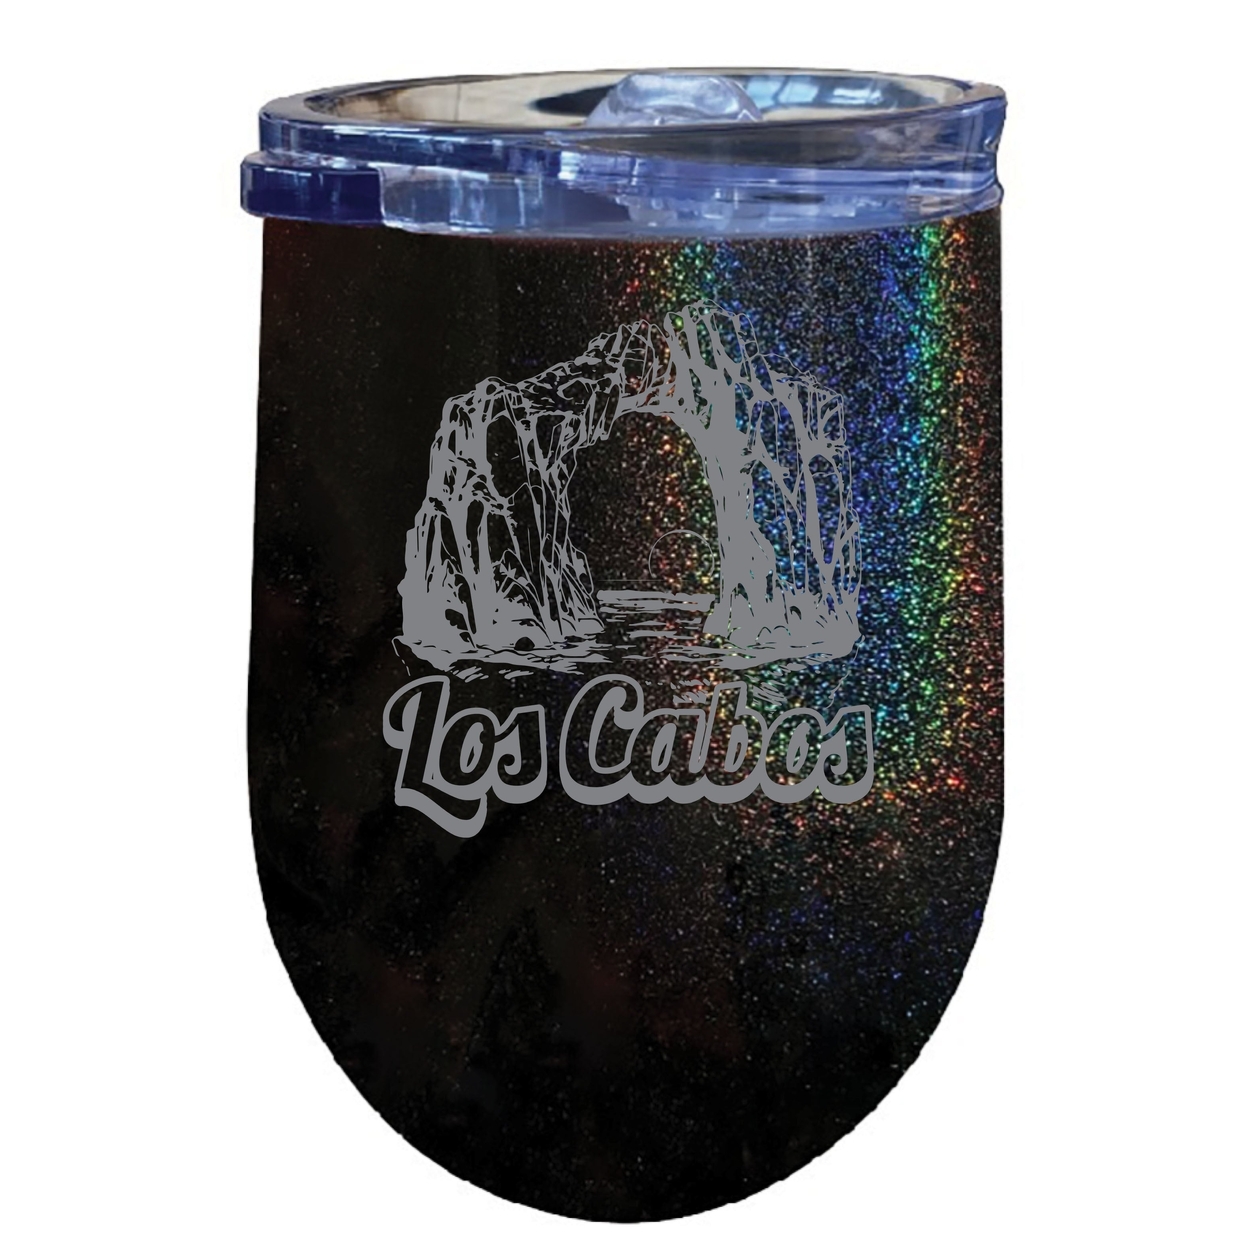 Los Cabos Mexico Souvenir 12 Oz Engraved Insulated Wine Stainless Steel Tumbler - White,,Single Unit